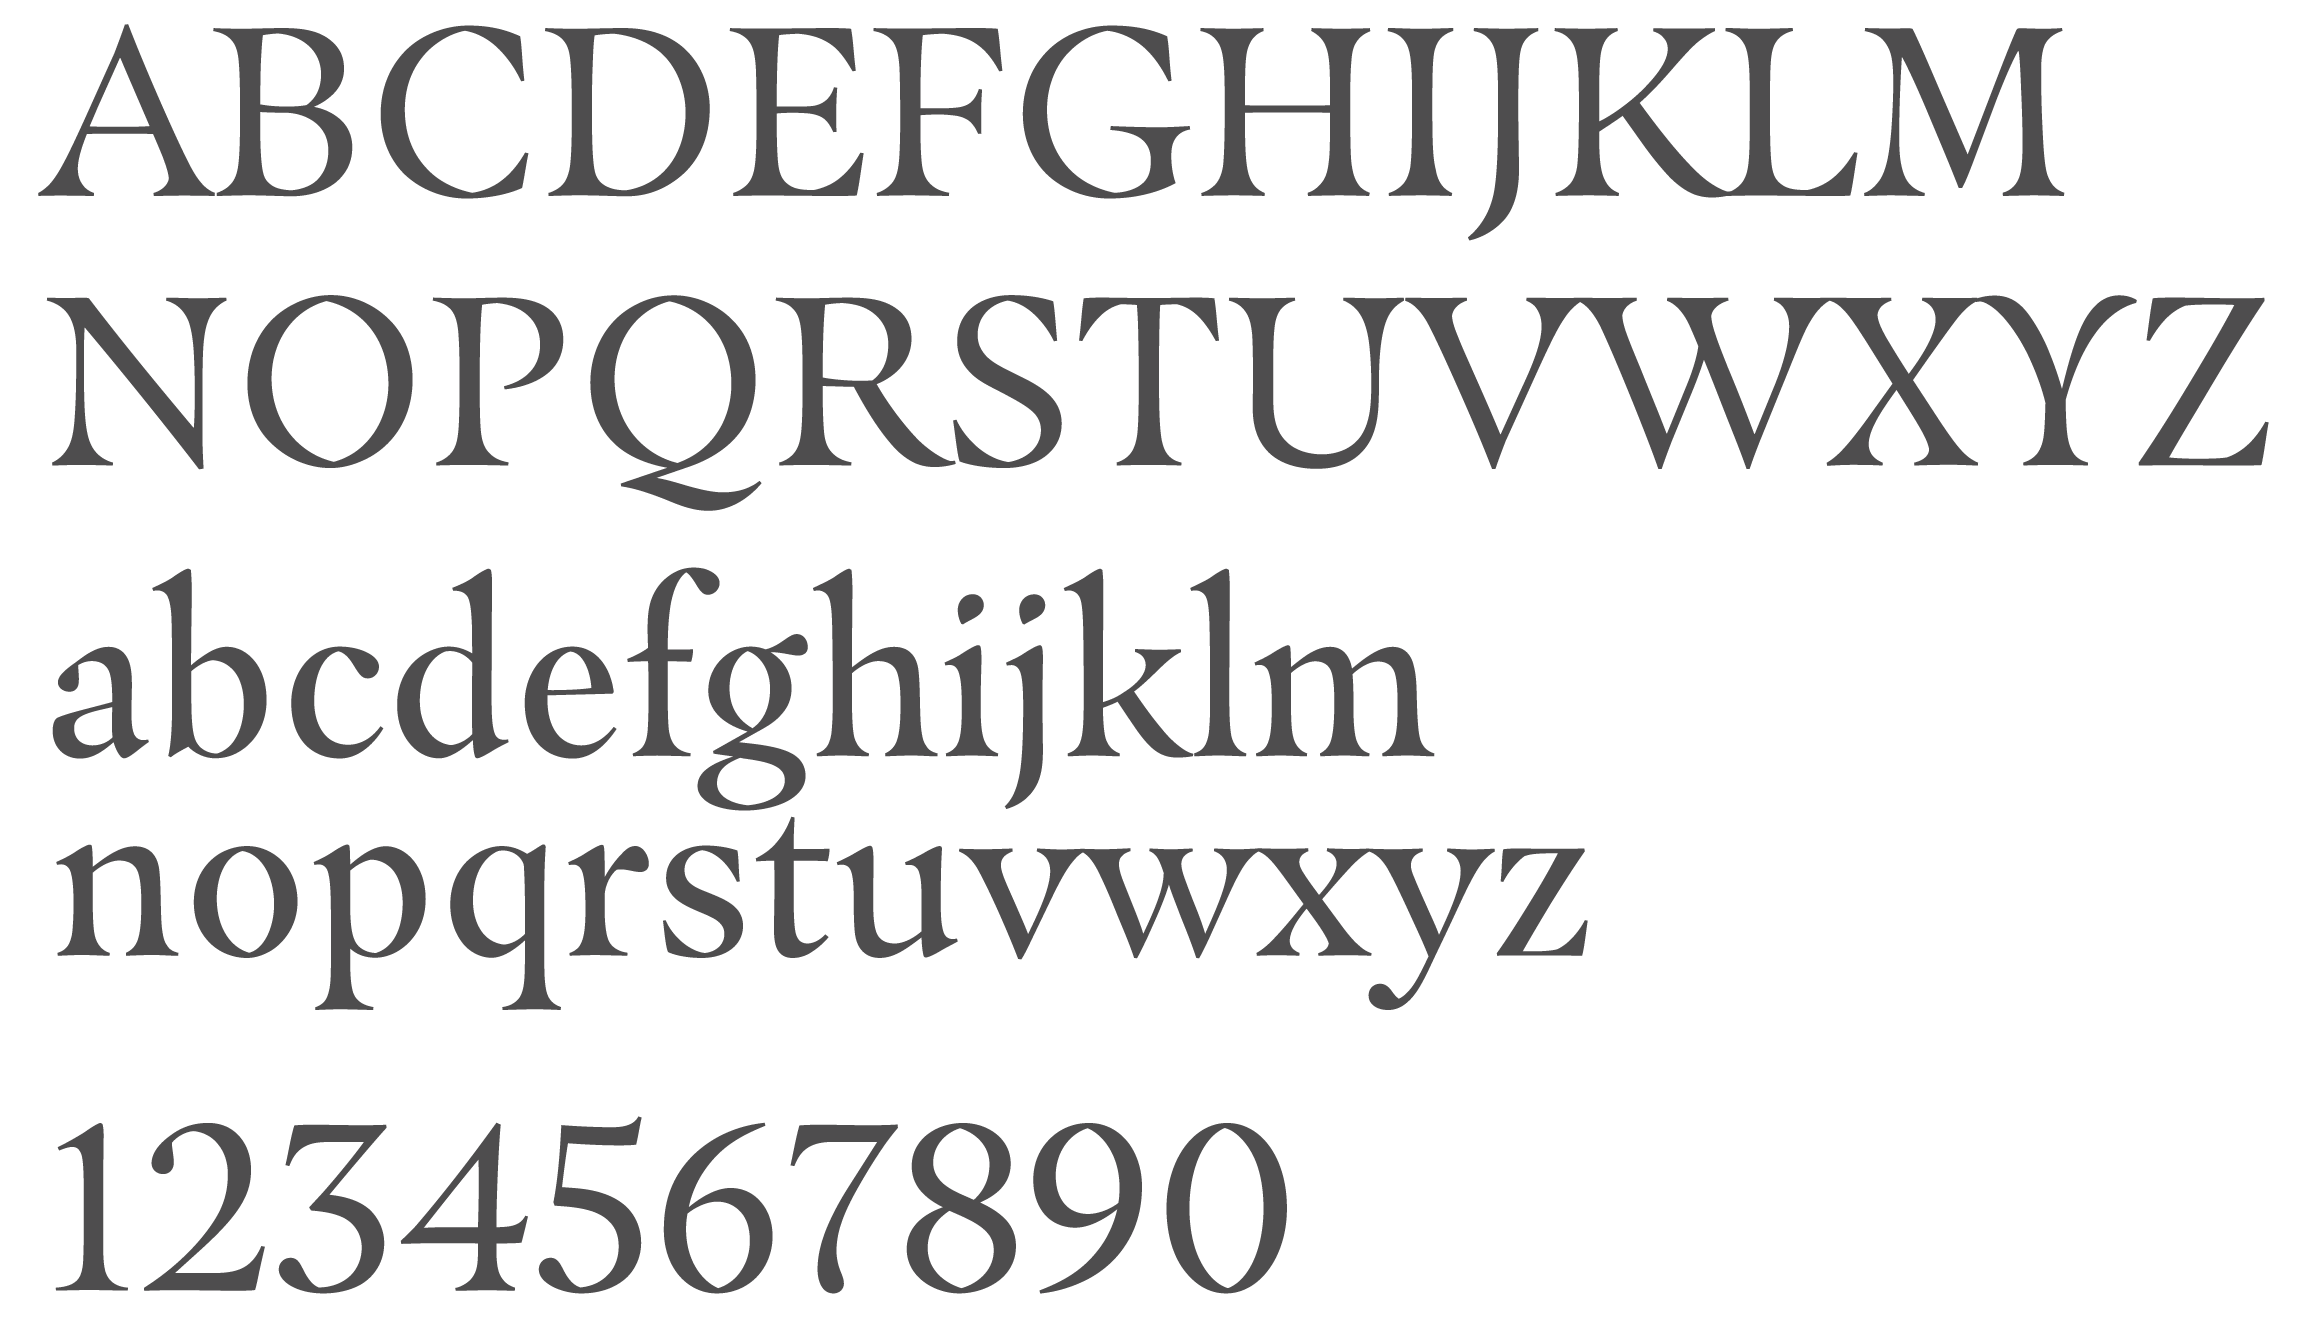 Masqualero type face displayed and an upper and lower case alphabet and numbers